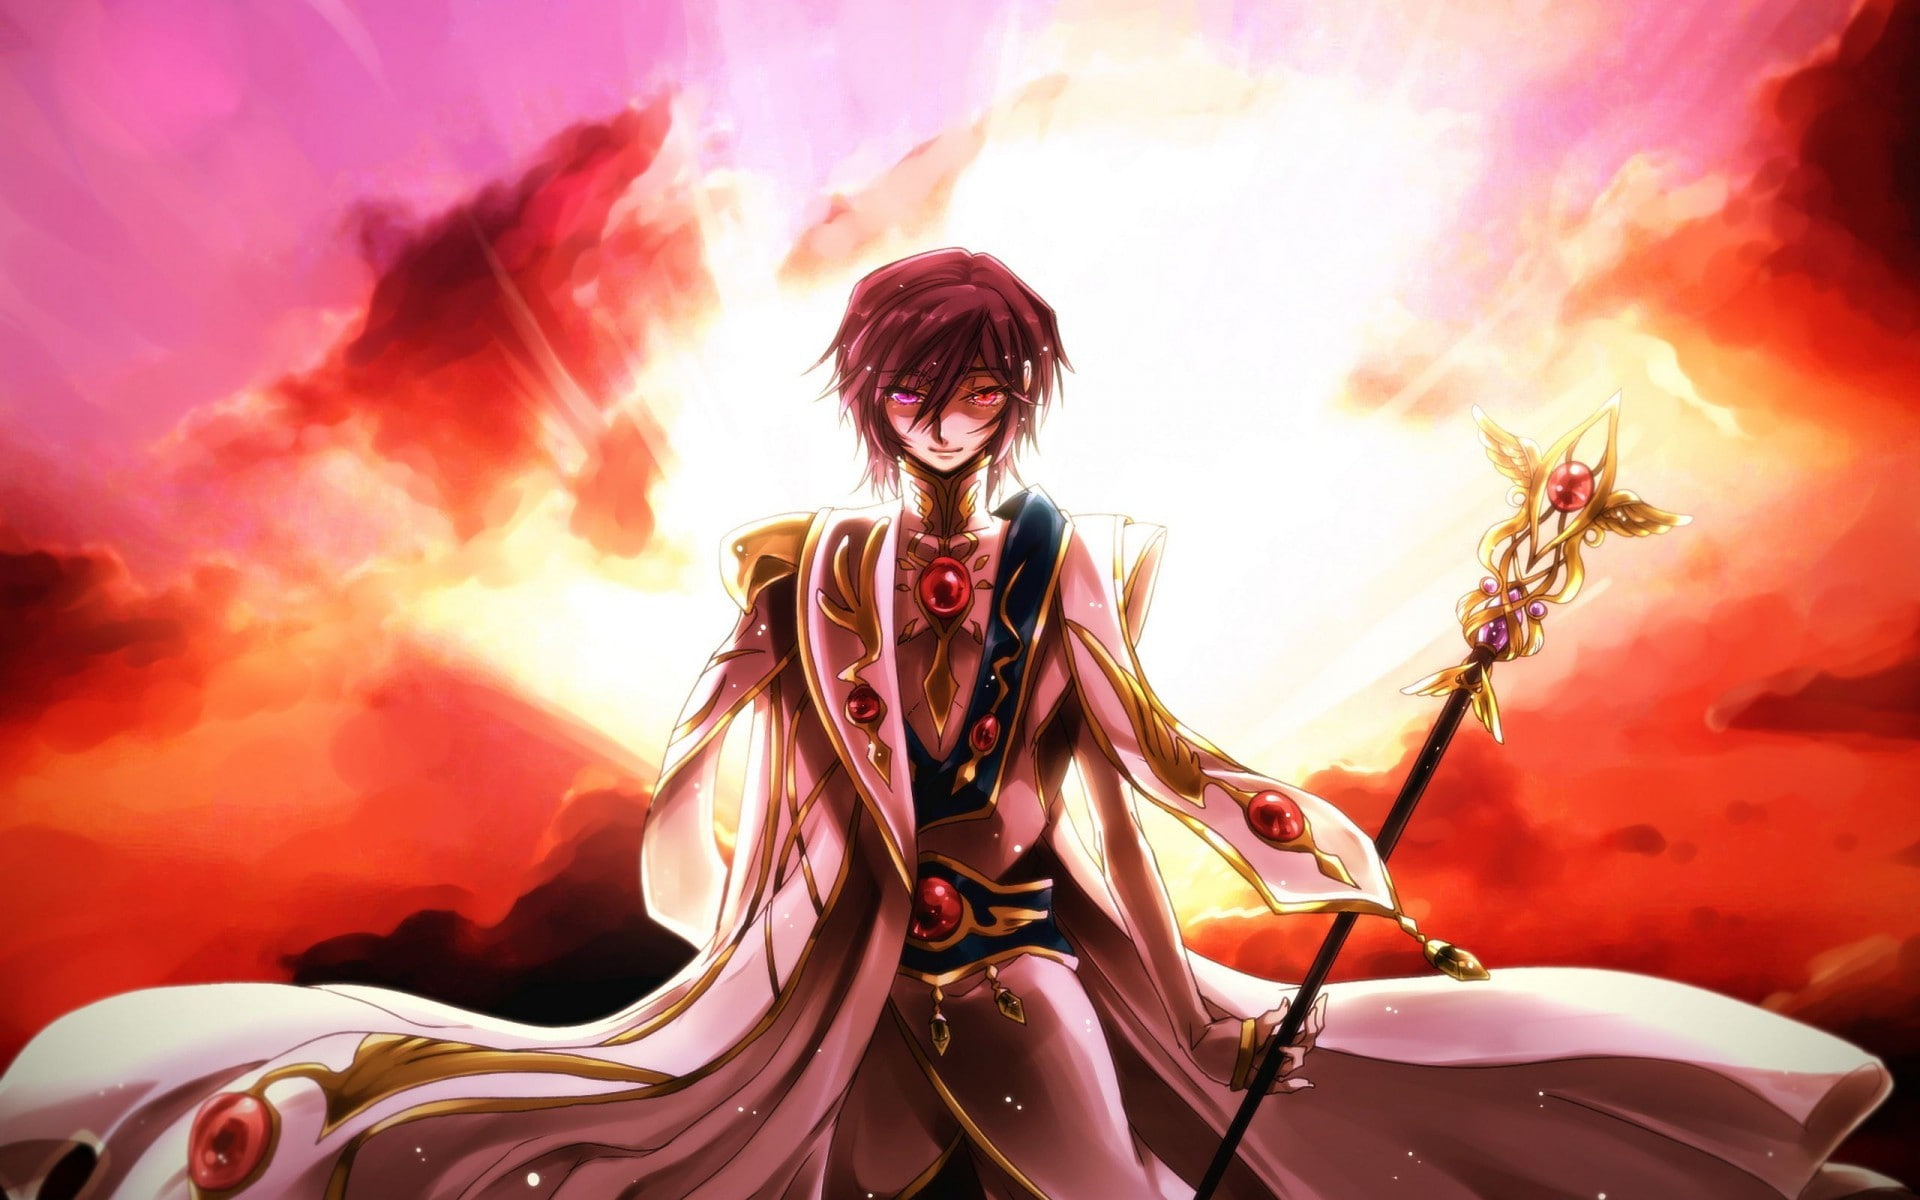 anime, Code Geass, Lamperouge Lelouch, one person, adult, women